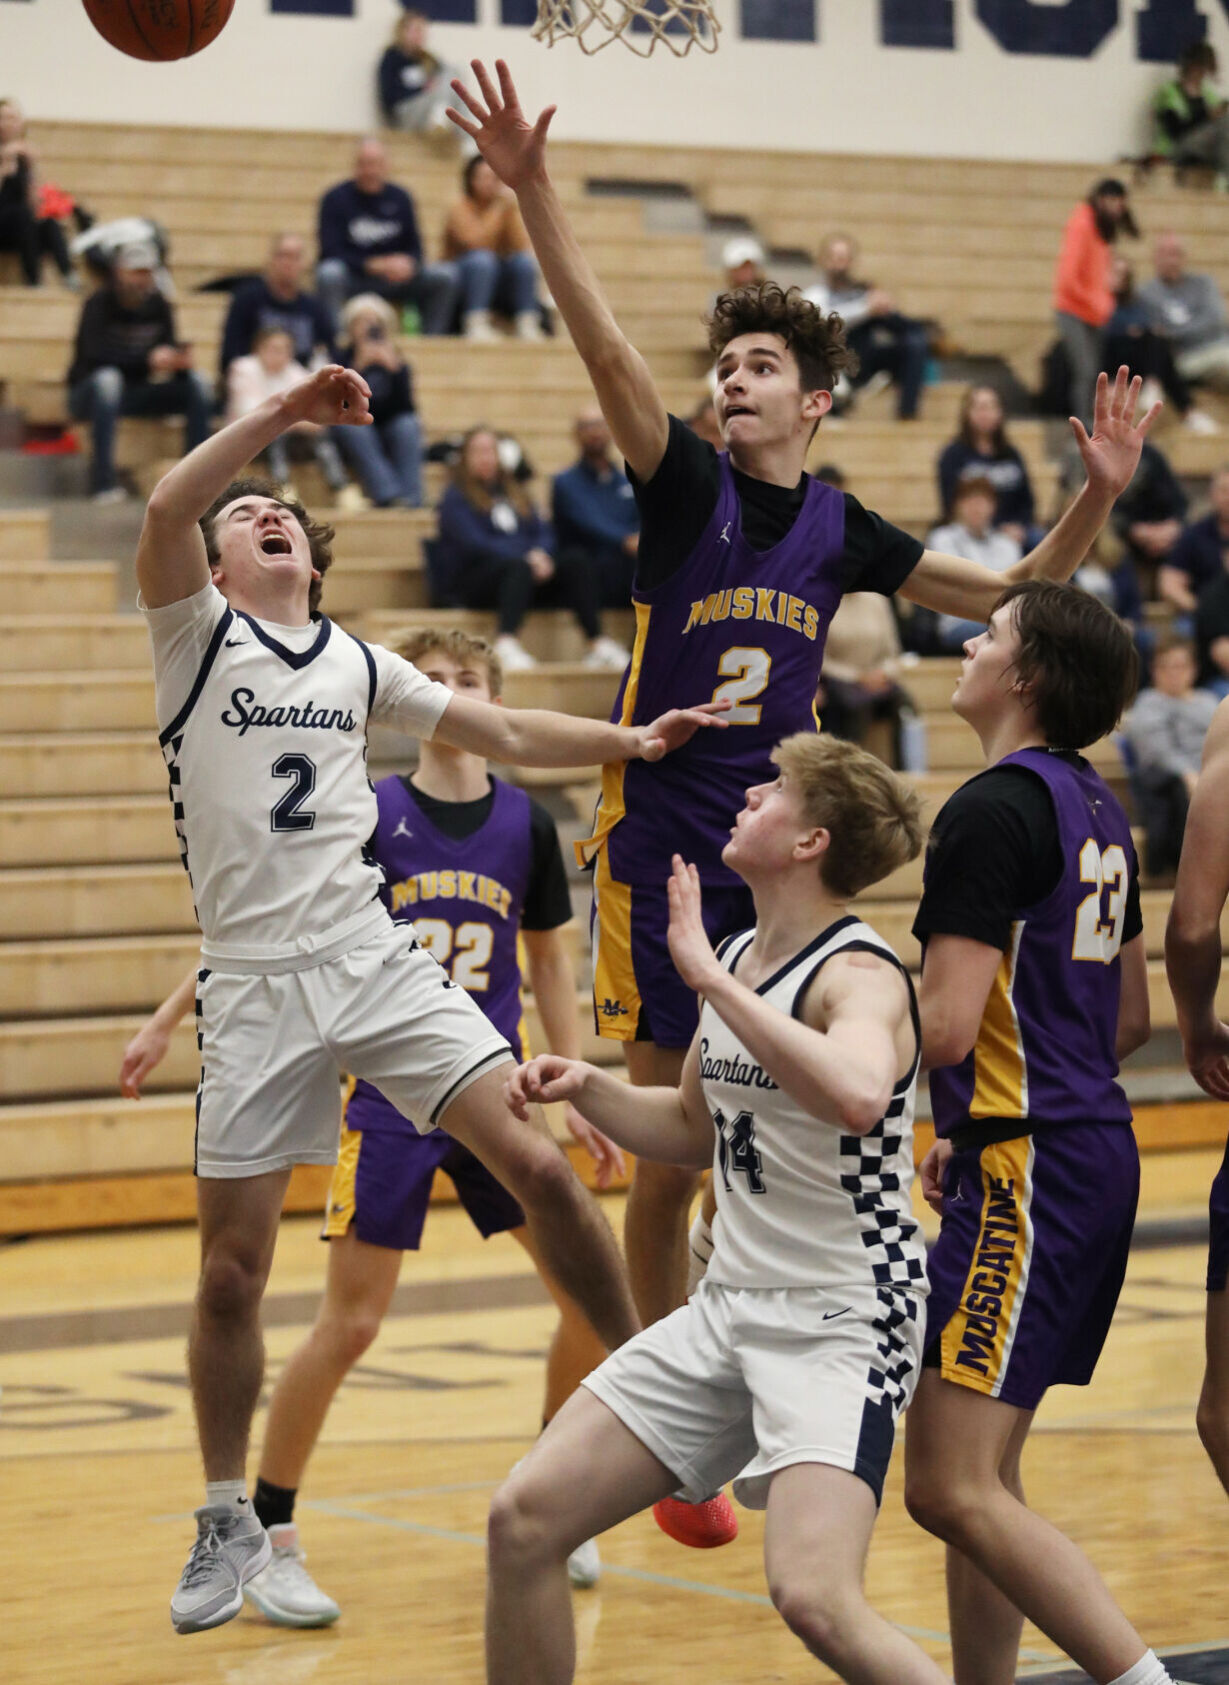 Pleasant Valley Triumphs Over Muscatine with 62-42 Victory